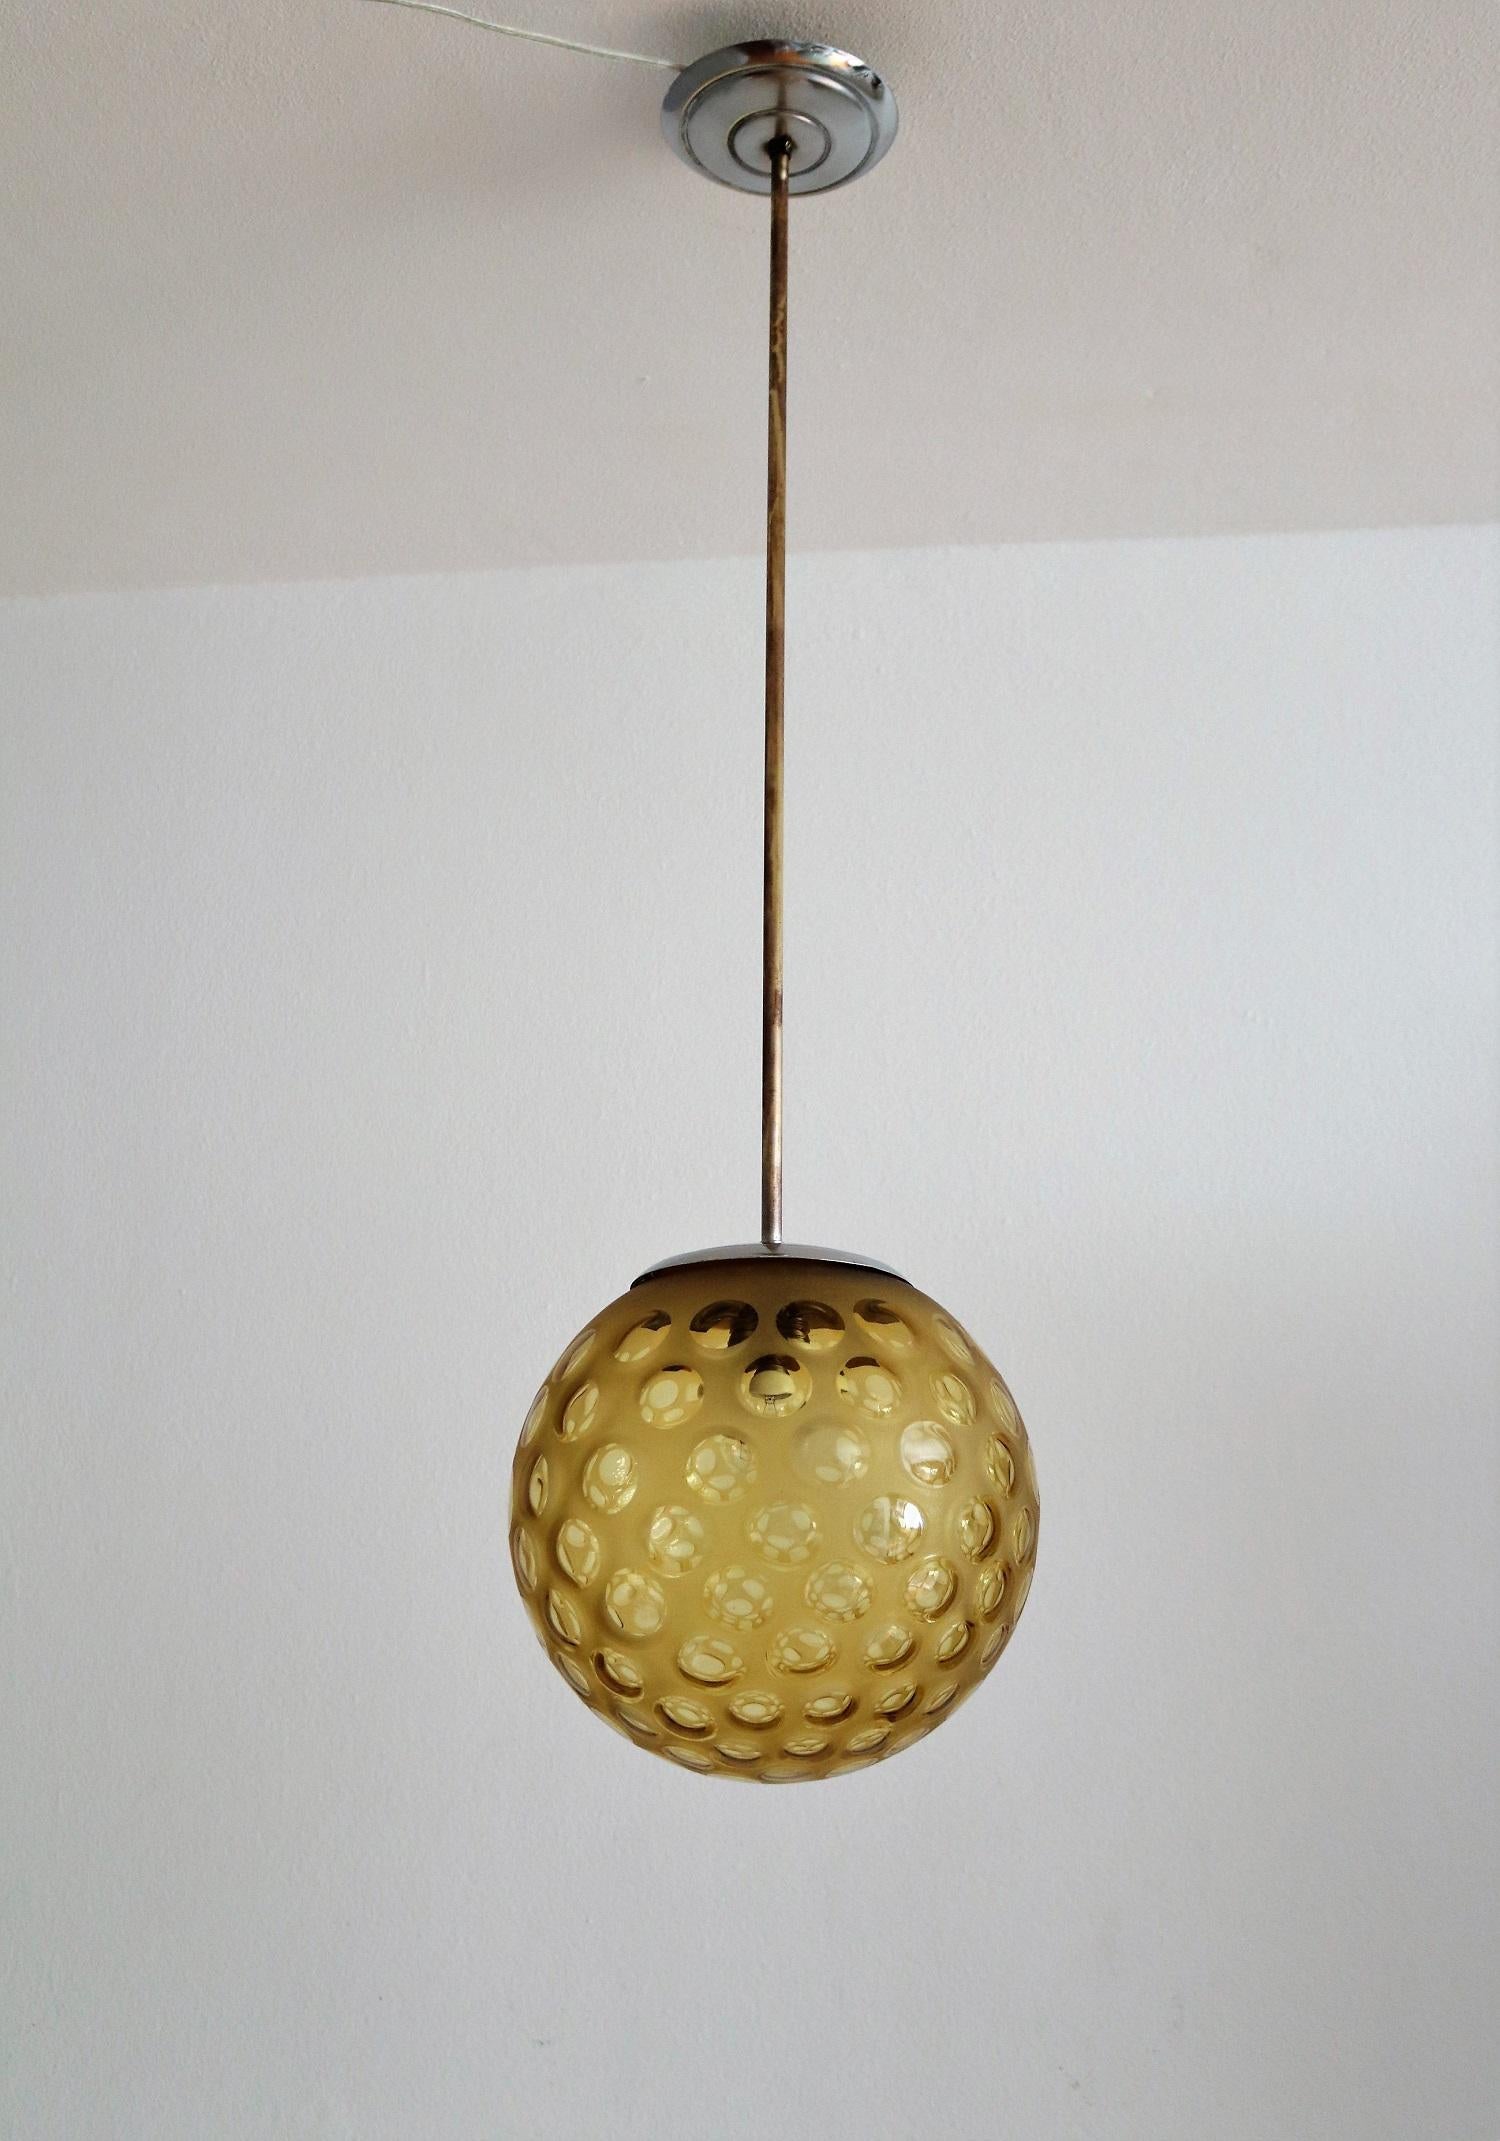 Italian Art Deco Pendant Lamp with Frosted Glass Globe, 1940s For Sale 2